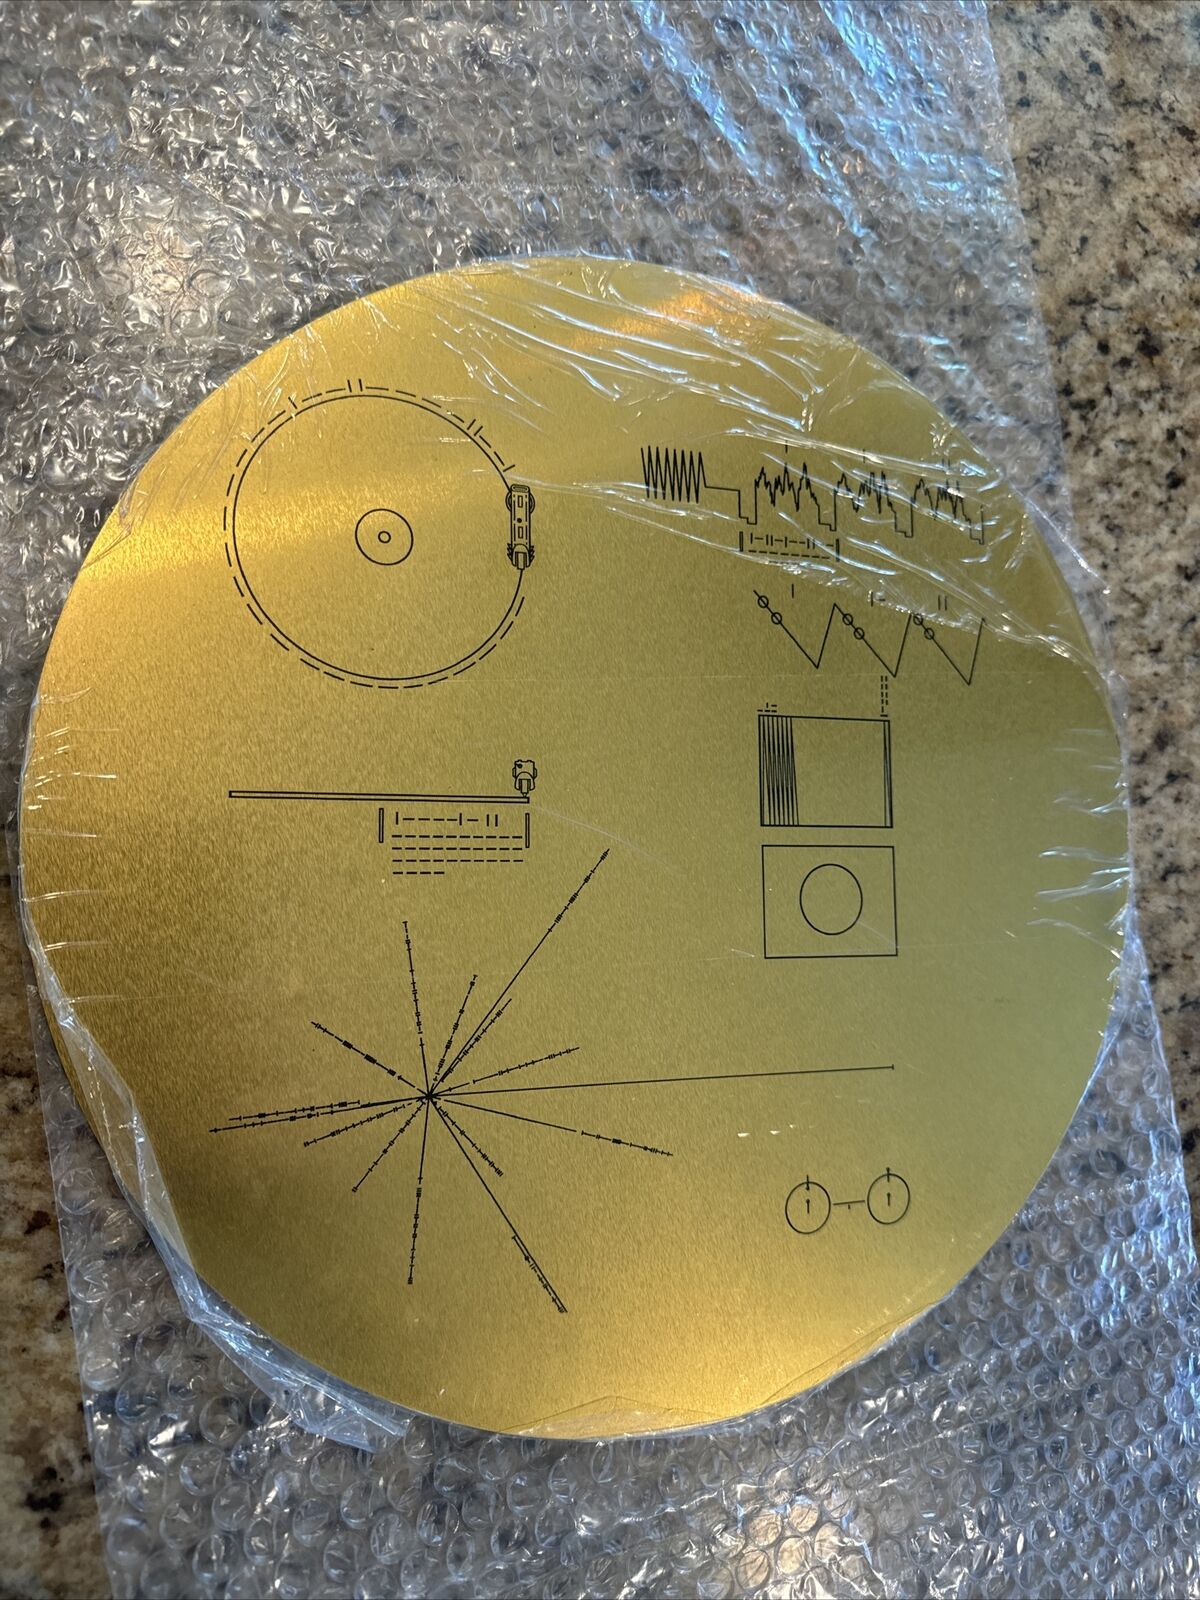 Voyager Golden Record - full size metal replica - Artist Signed